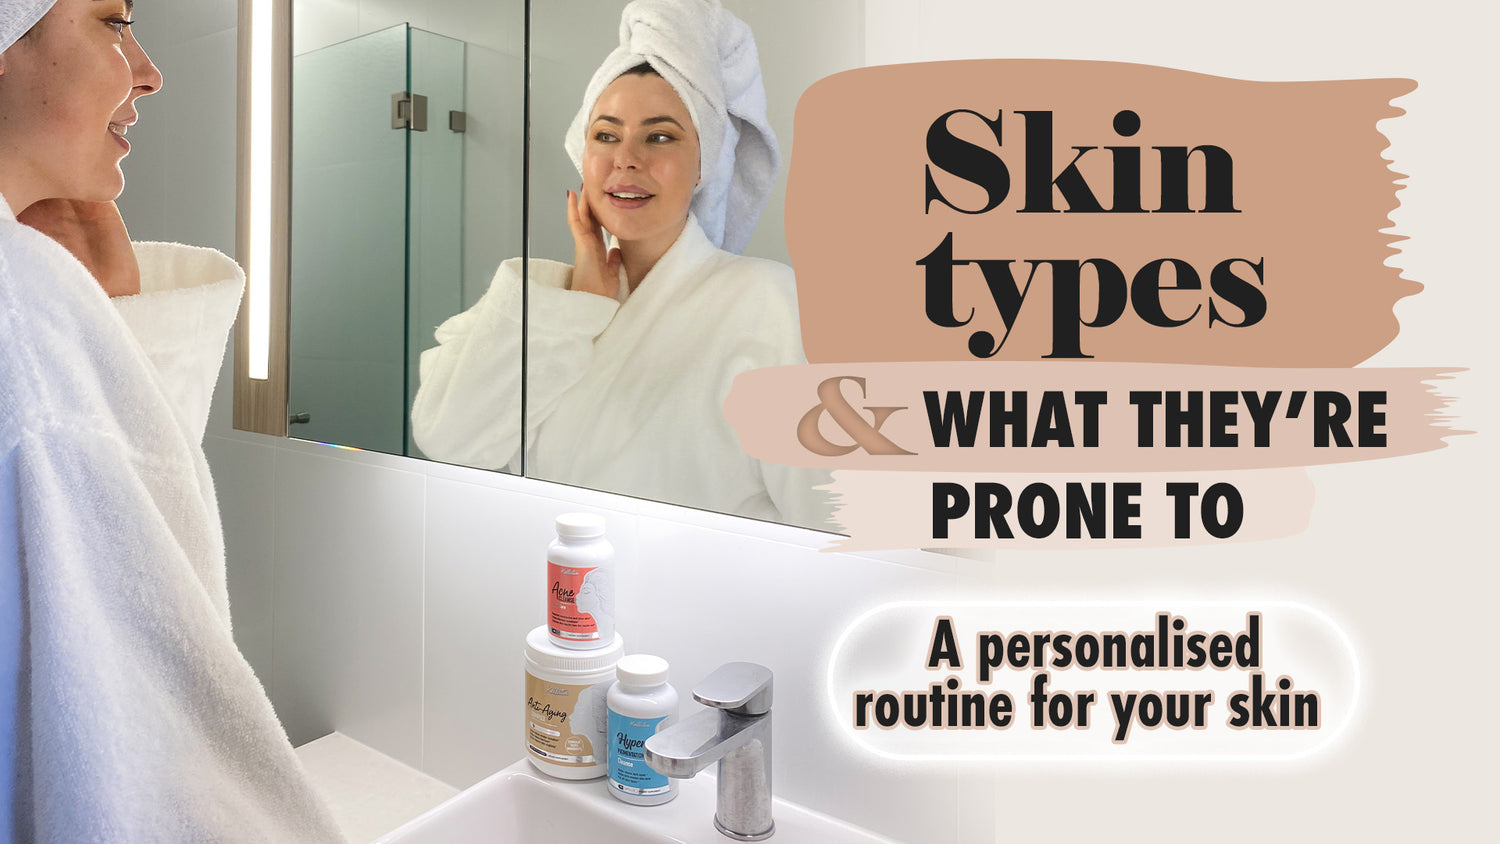 A personalised routine for your skin type